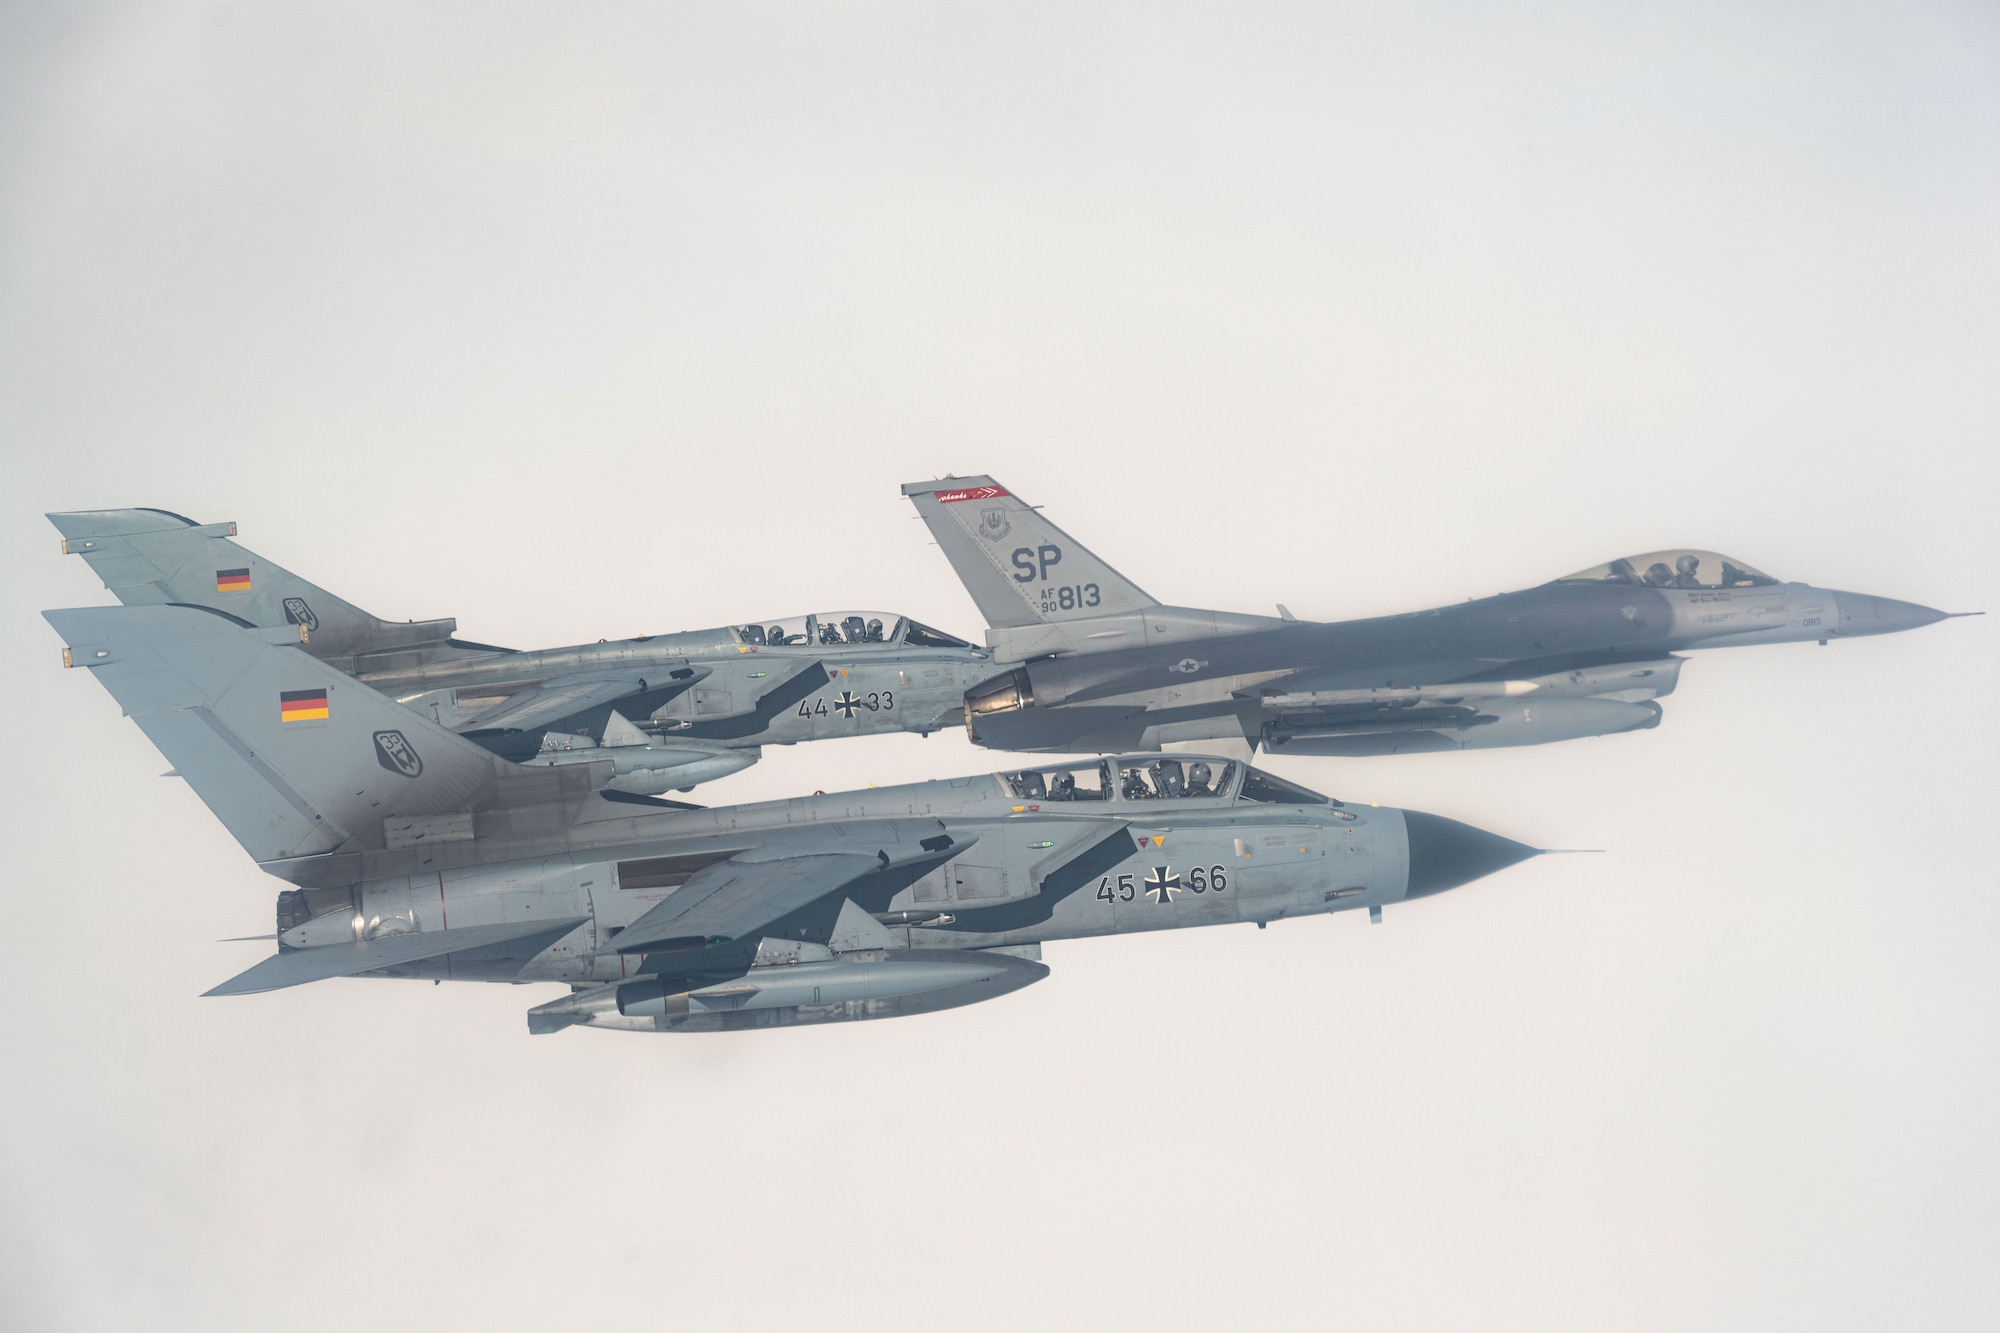 A U.S. Air Force F-16 Fighting Falcon assigned to the 480th Fighter Squadron at Spangdahlem Air Base, Germany, flies alongside two German Air Force PA-200 Tornado aircraft assigned to Tactical Air Wing 33, Büchel AB